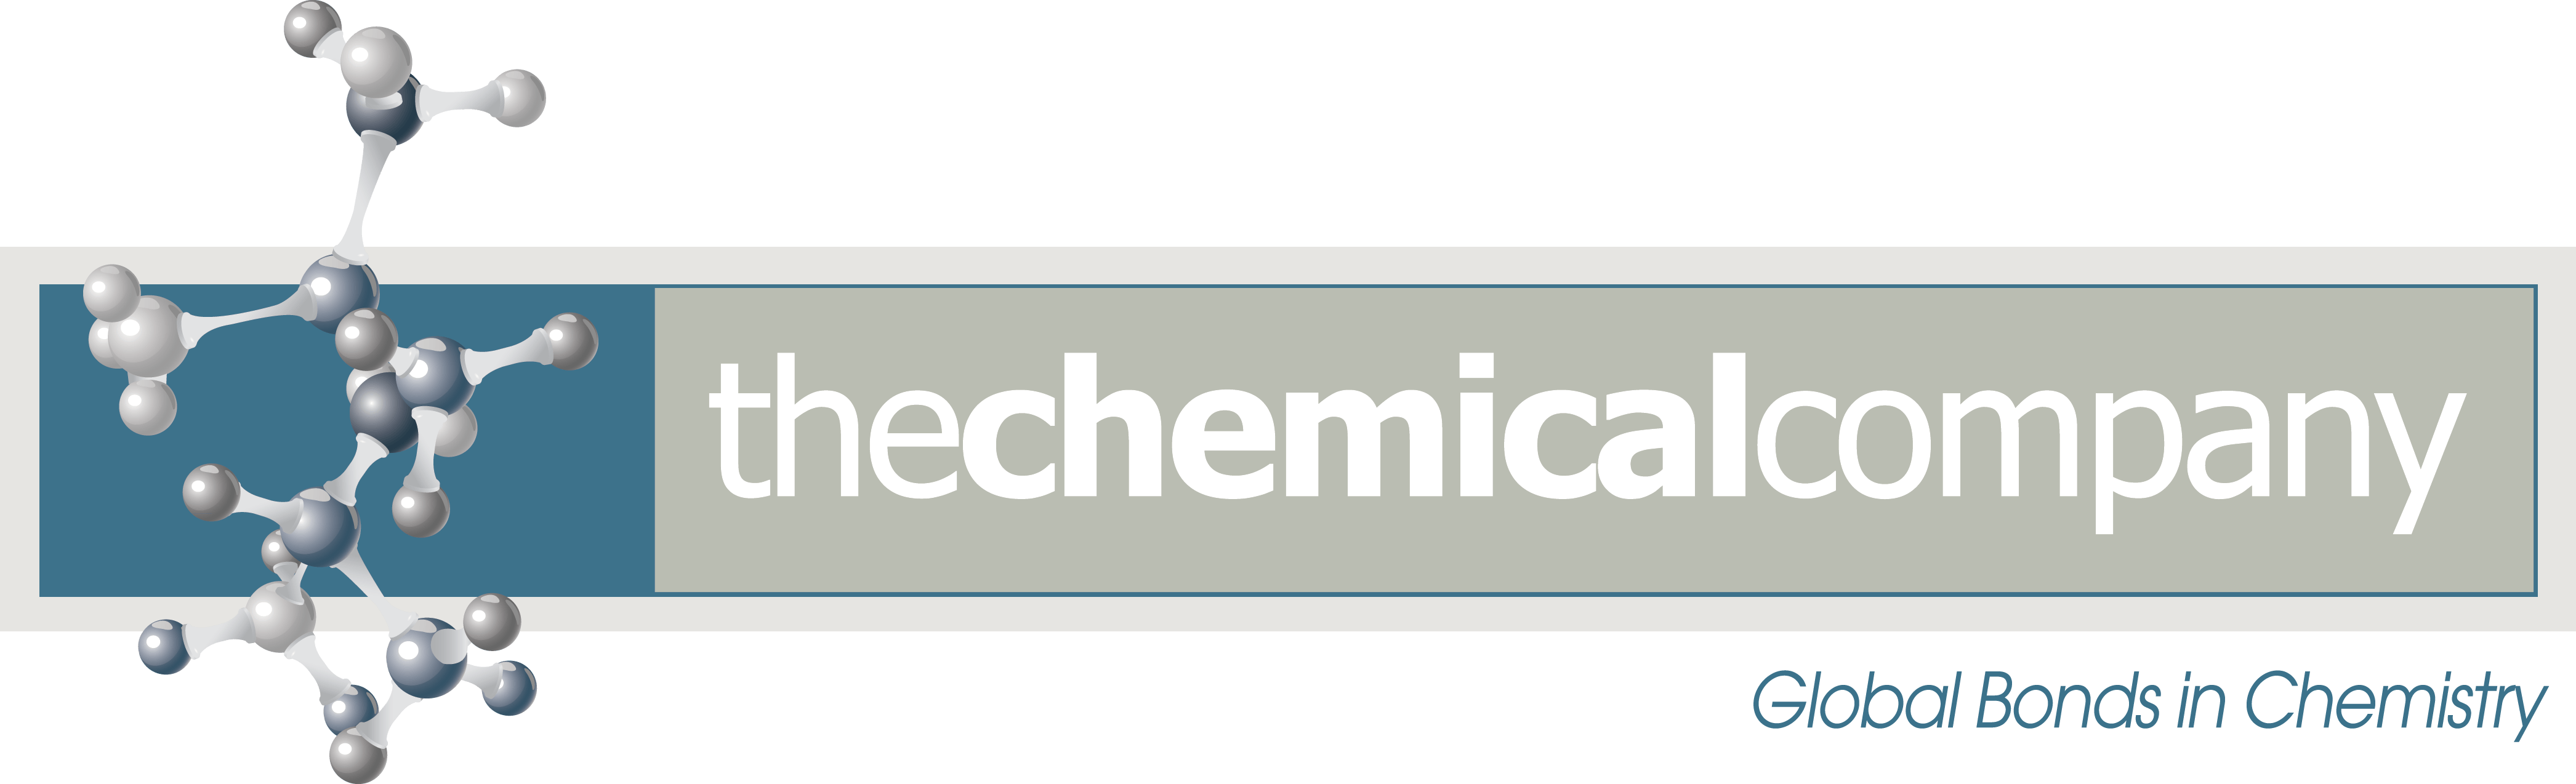 Petrochemical Company Logo - The Chemical Company Chemical Supplier